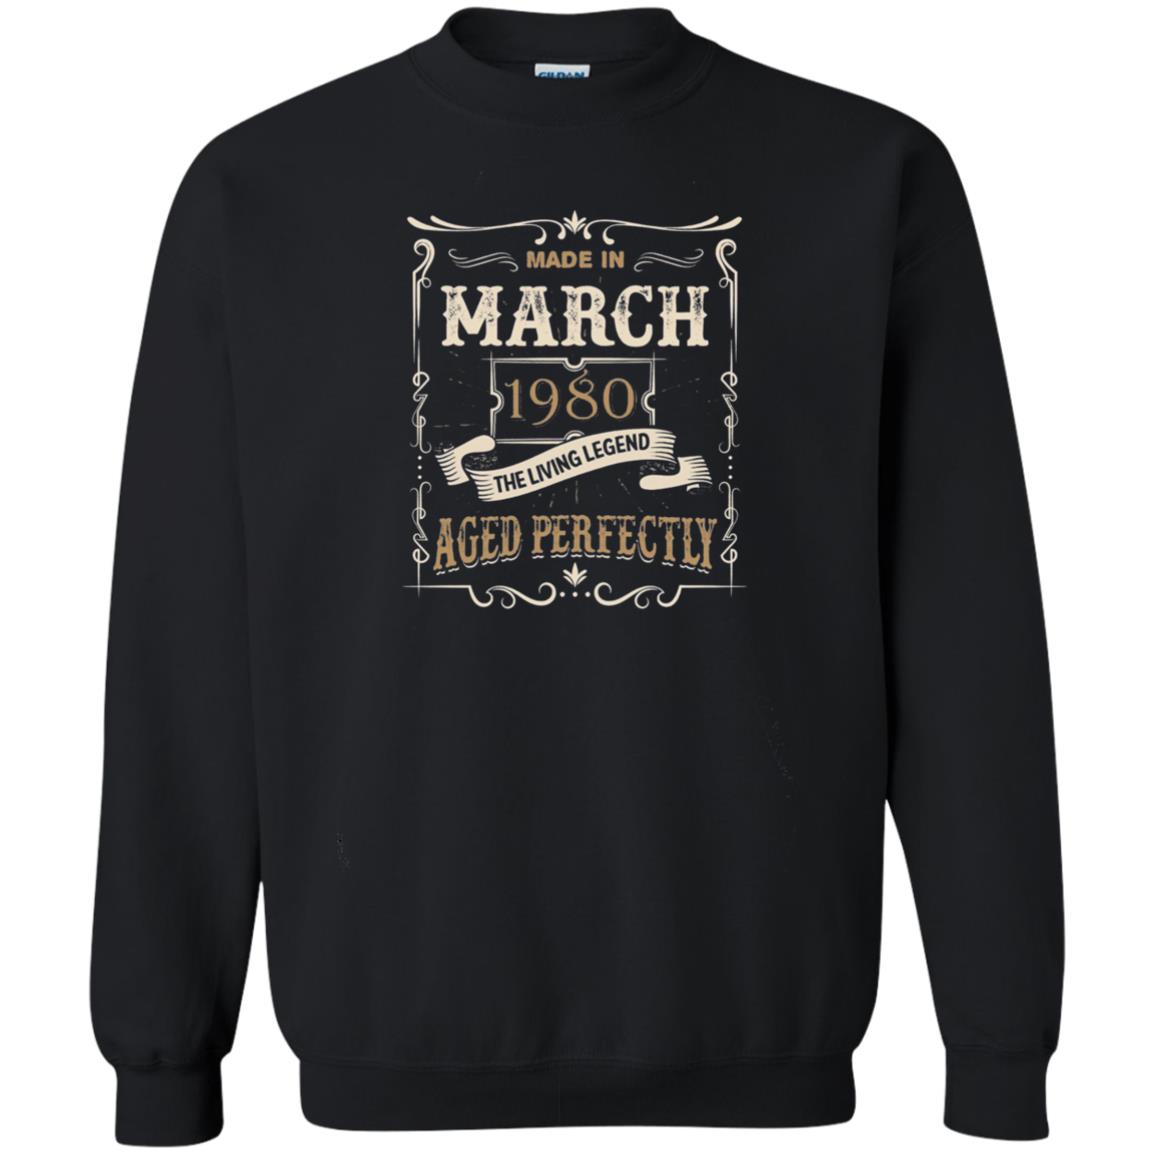 Made In March 1980 The Living Legend 38th Birthday T-shirt